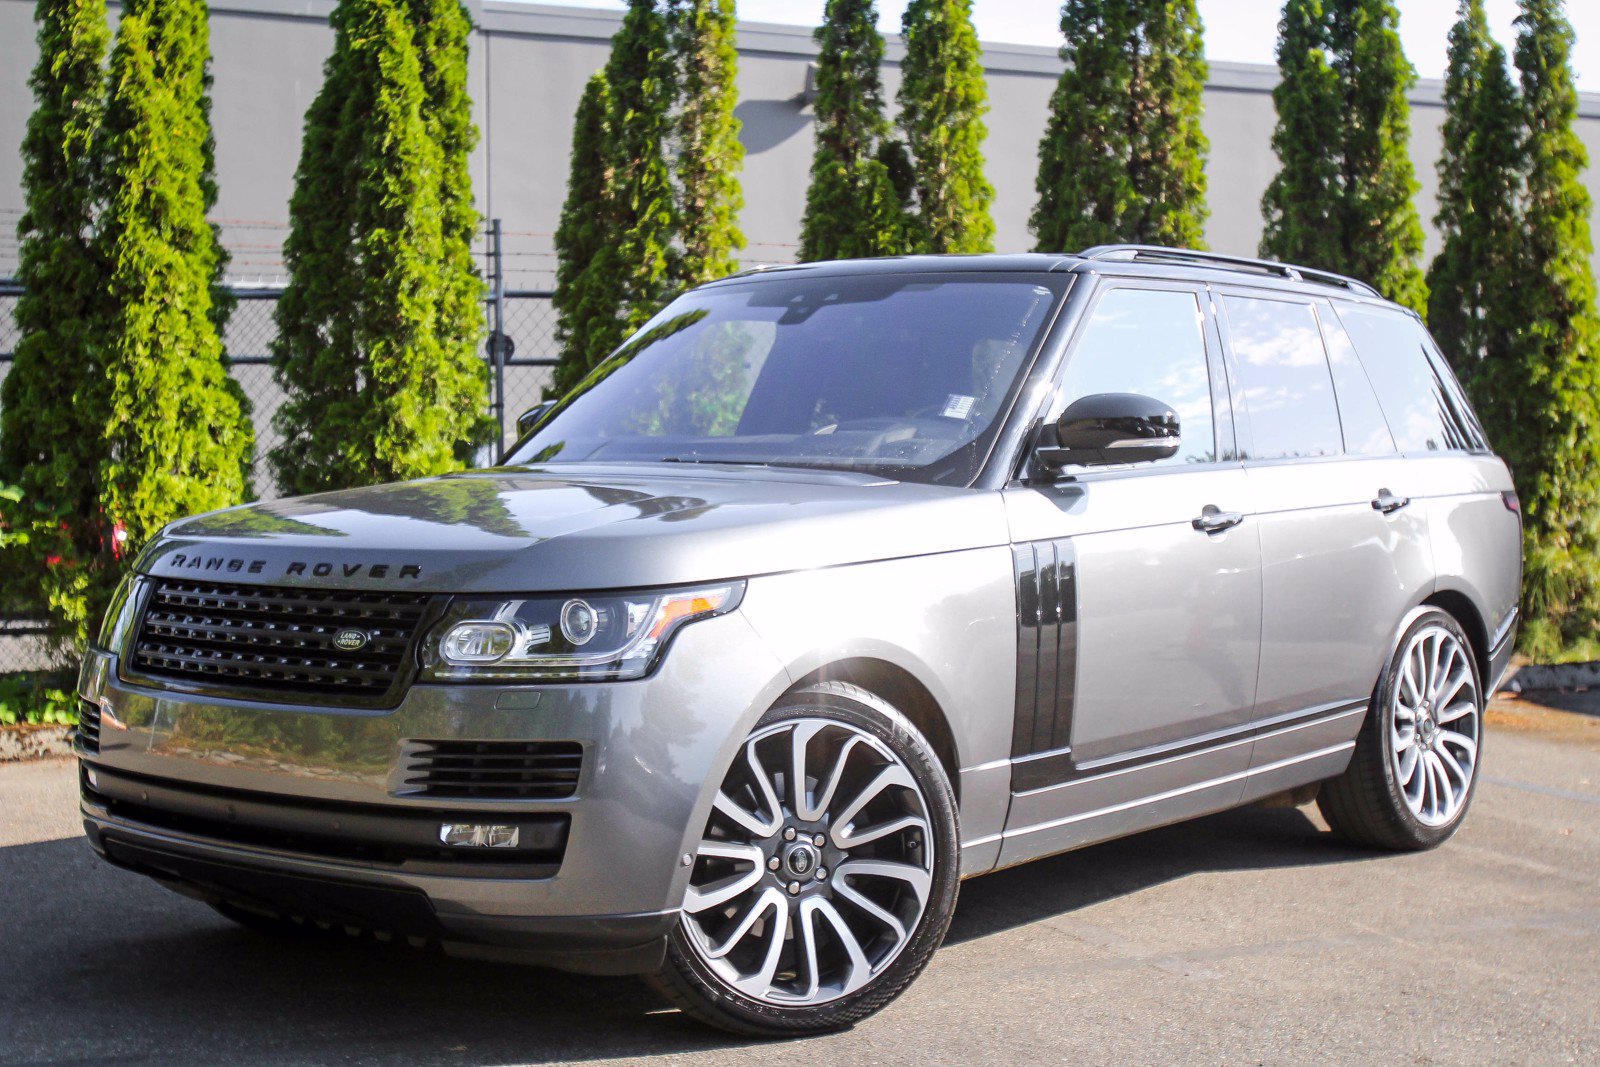 Used Range Rover For Sale Bellevue Wa  : You Can Search Range Rover Cars For Sale Section According To Car Model, Year, Price Range Or Type.